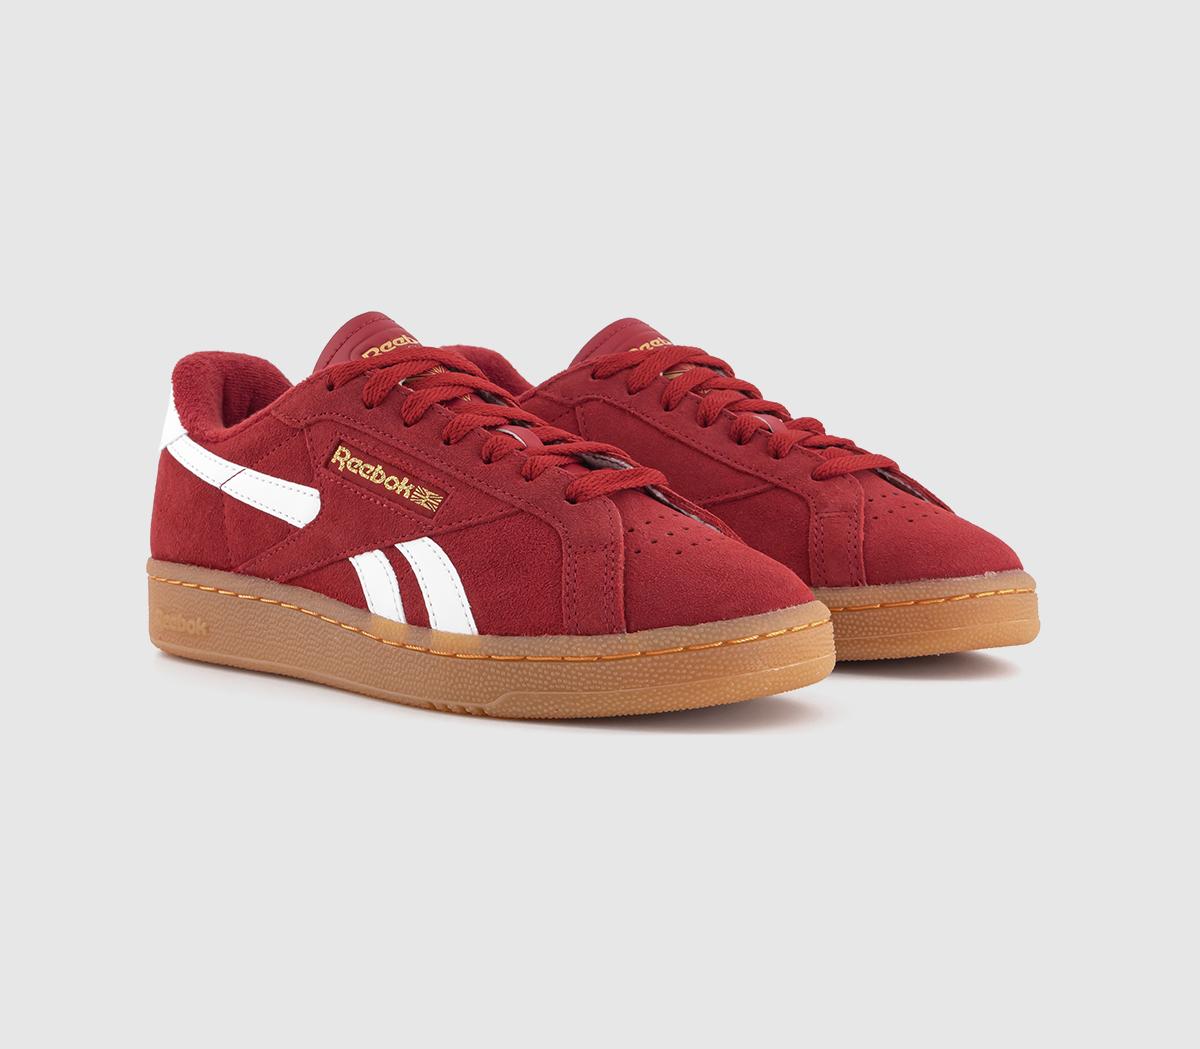 Reebok Womens Club C Grounds Trainers Flash Red Gum, 10